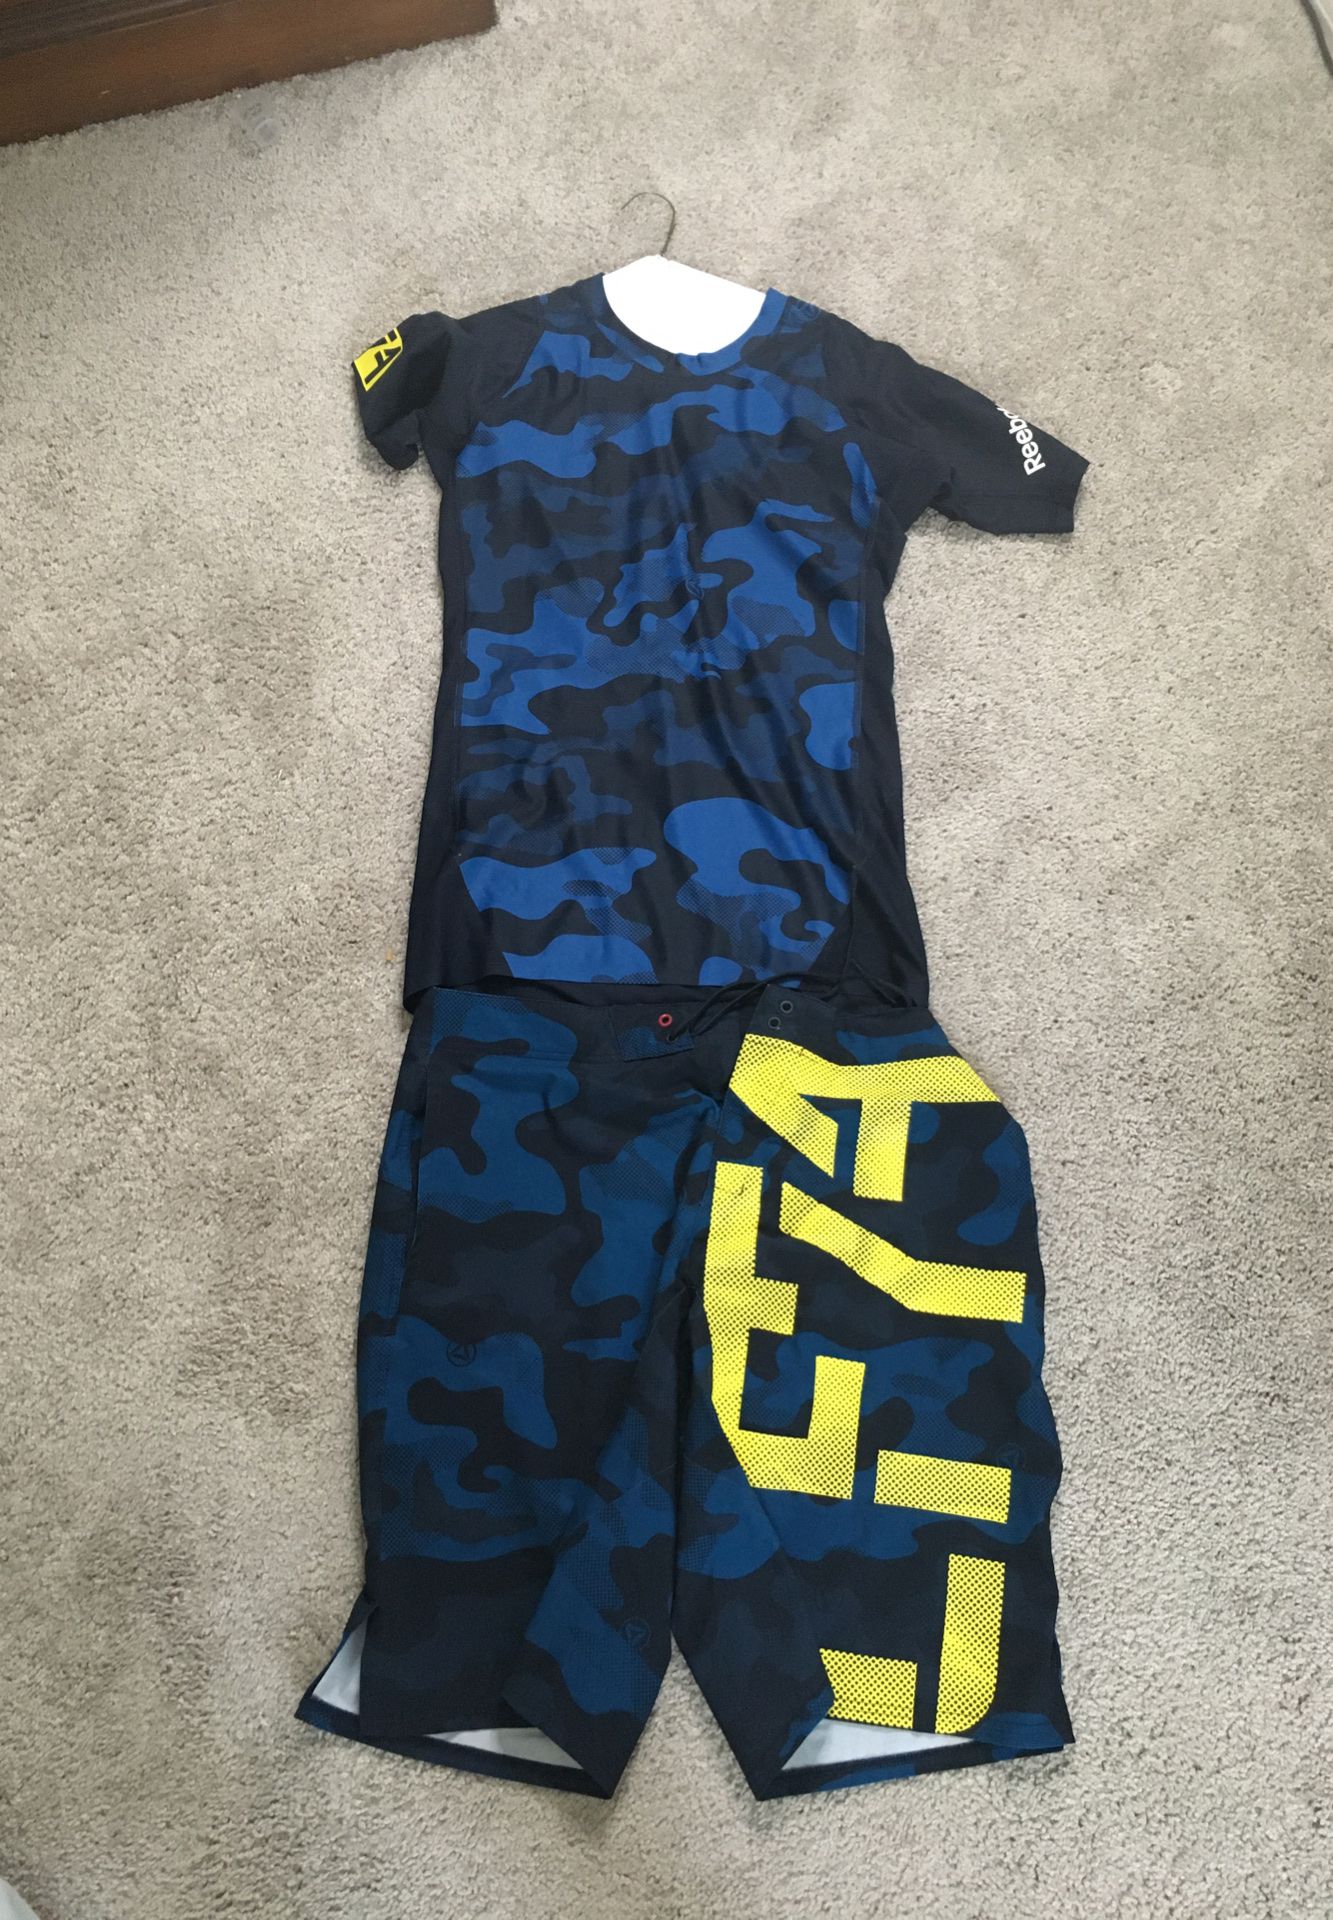 Reebok Outfit Large for Sale Palm Coast, FL - OfferUp